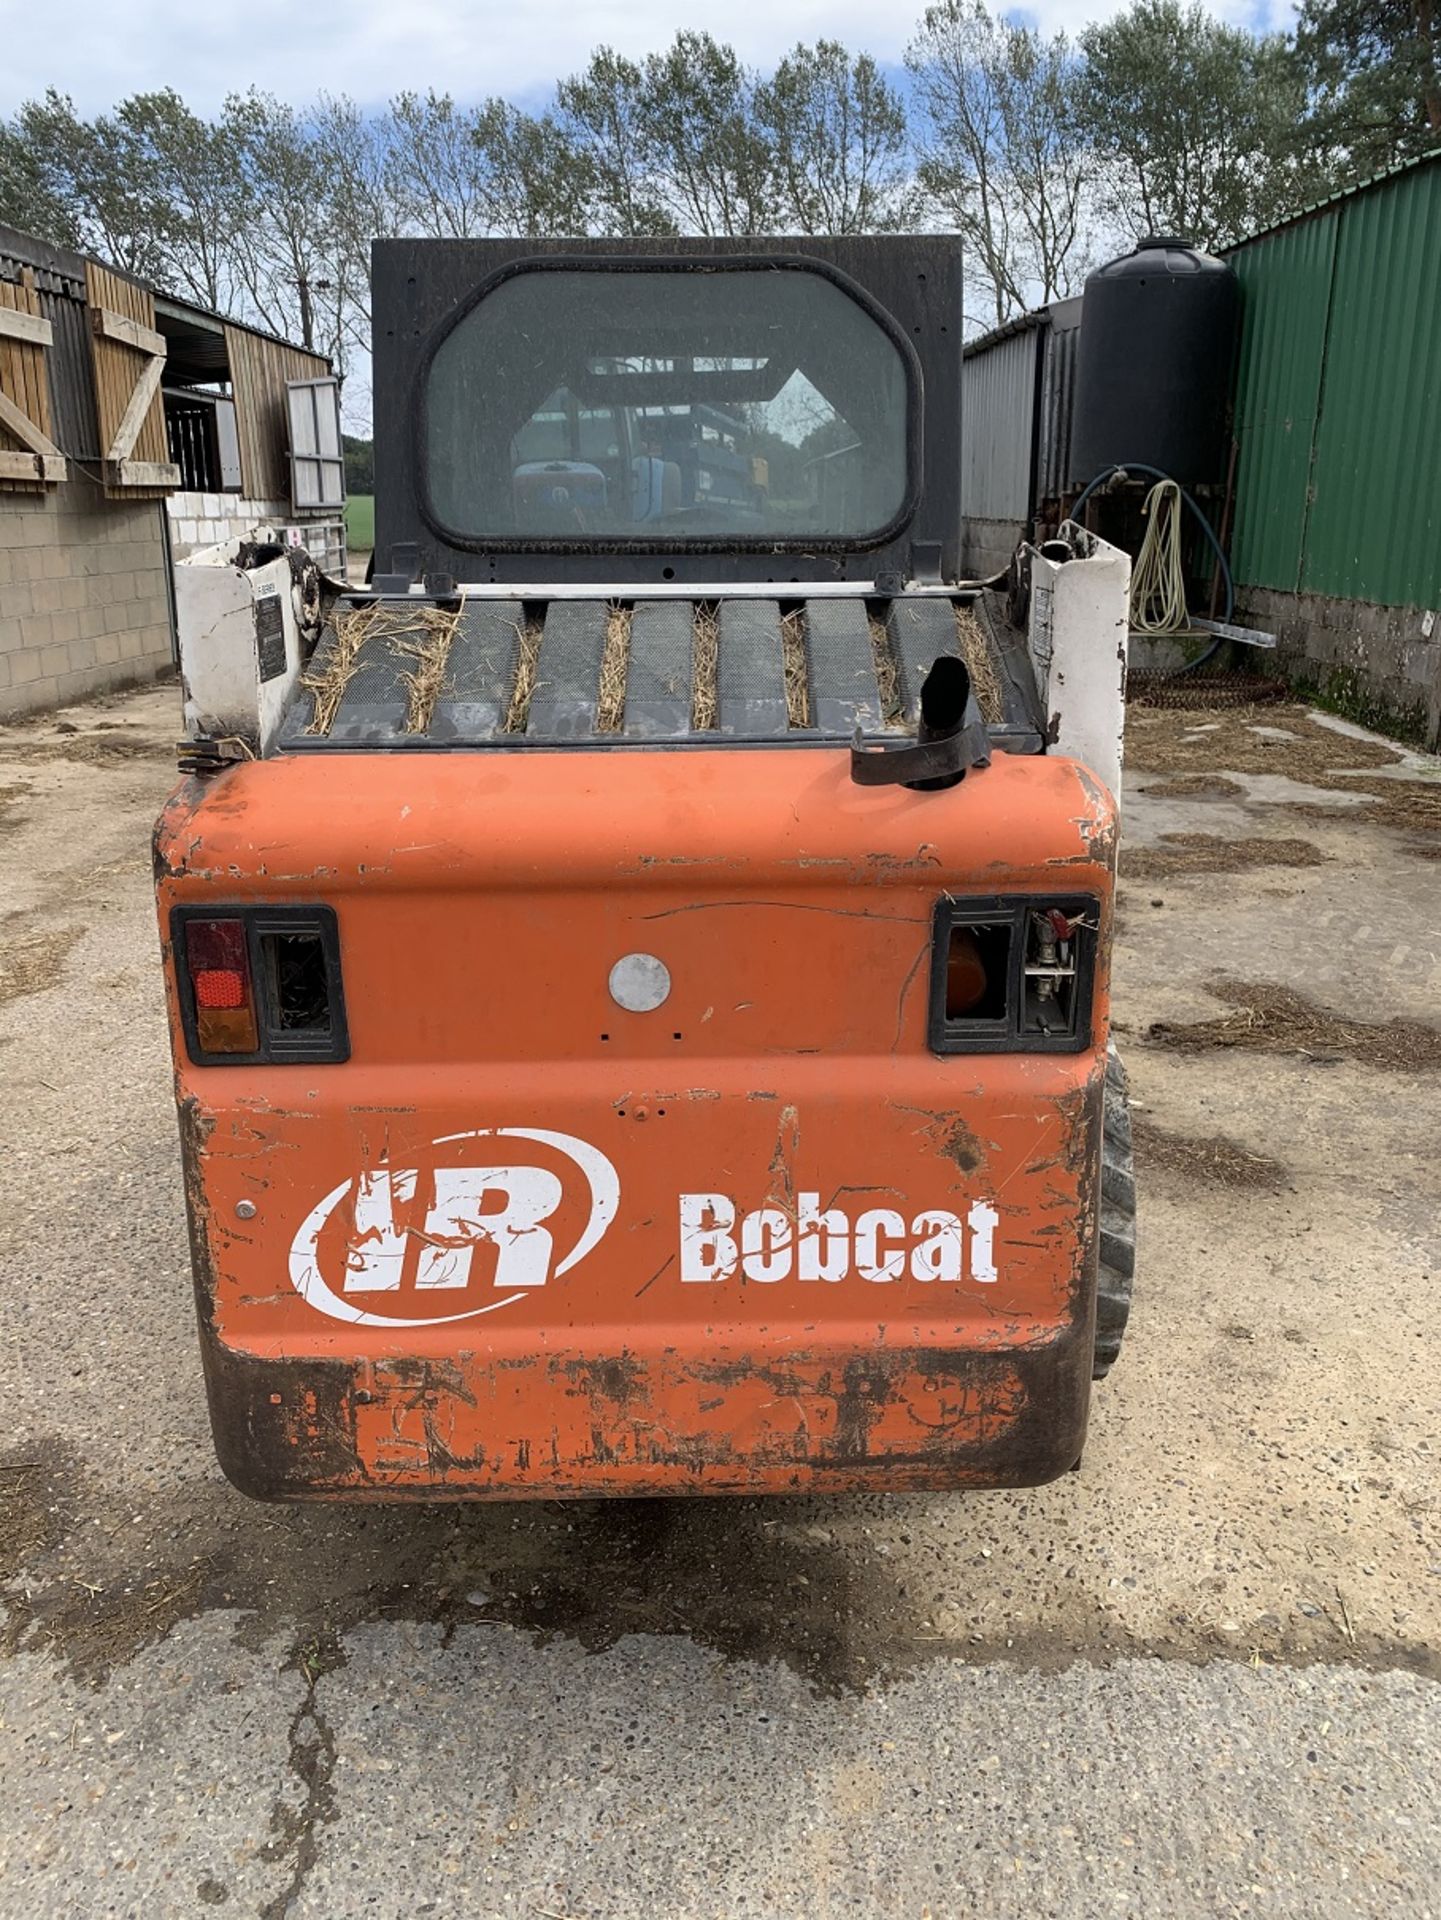 Bobcat 751 compact skid steer (1999) Rebuilt Engine in March 2020 Comes with Spare wheel, - Image 4 of 5